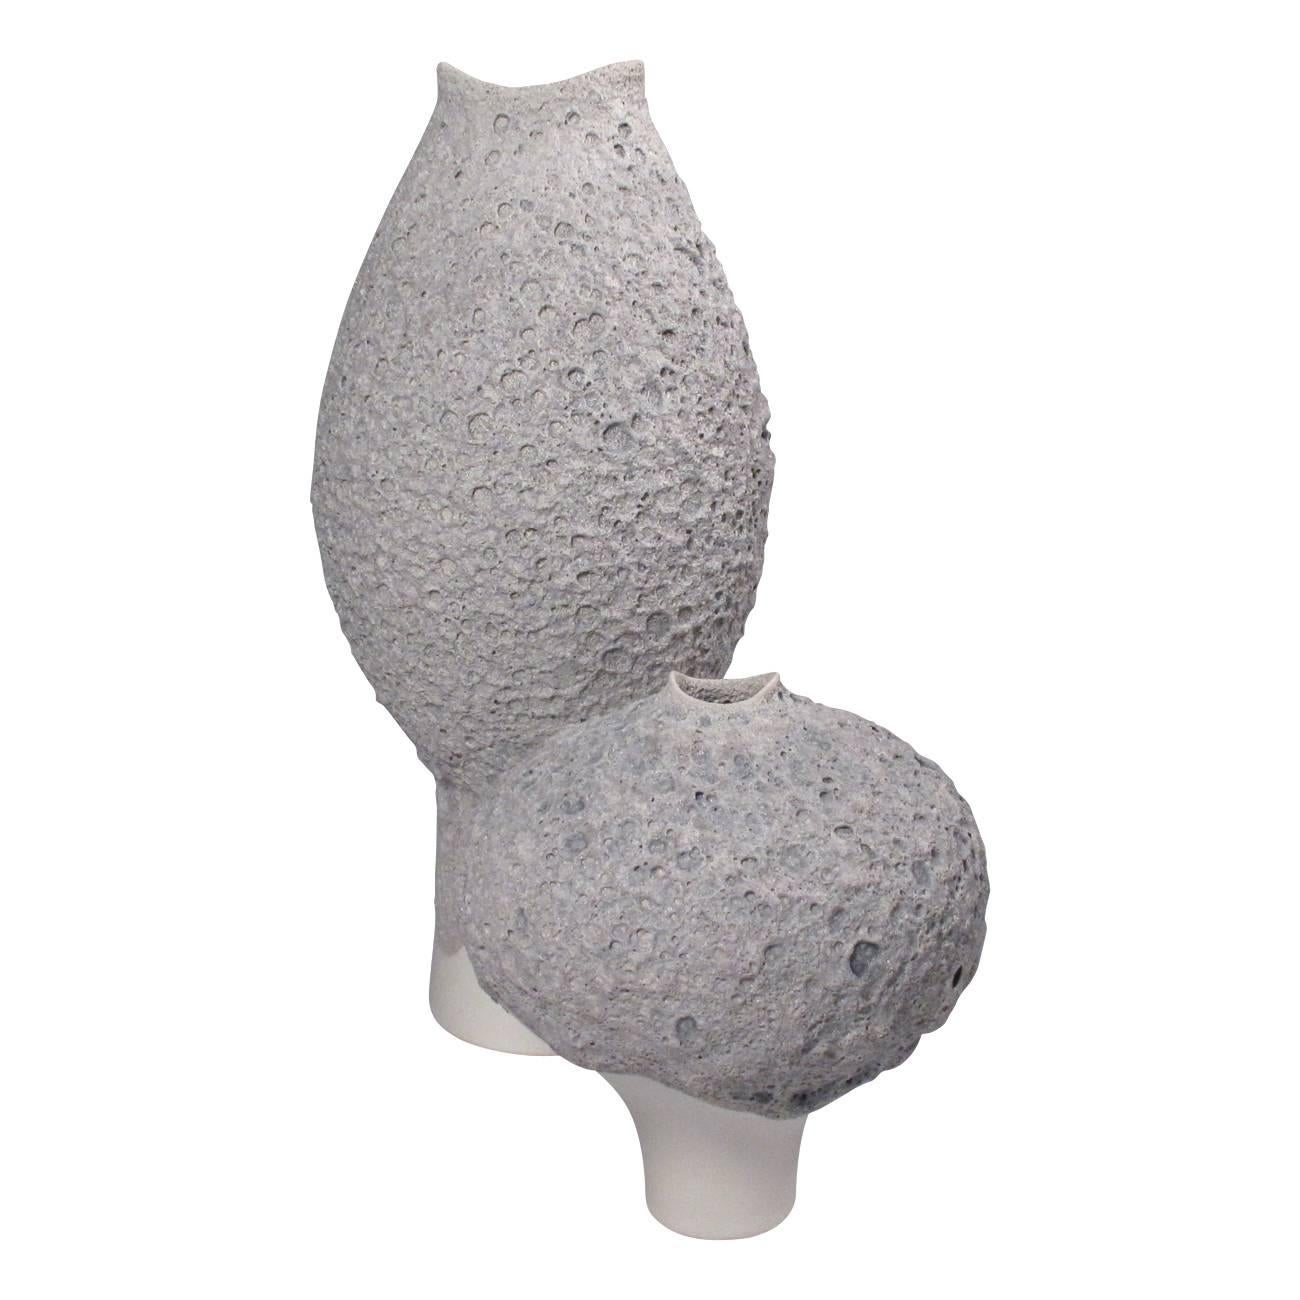 A tall light grey ceramic vase with a lava glaze. Additional items are available in the collection.